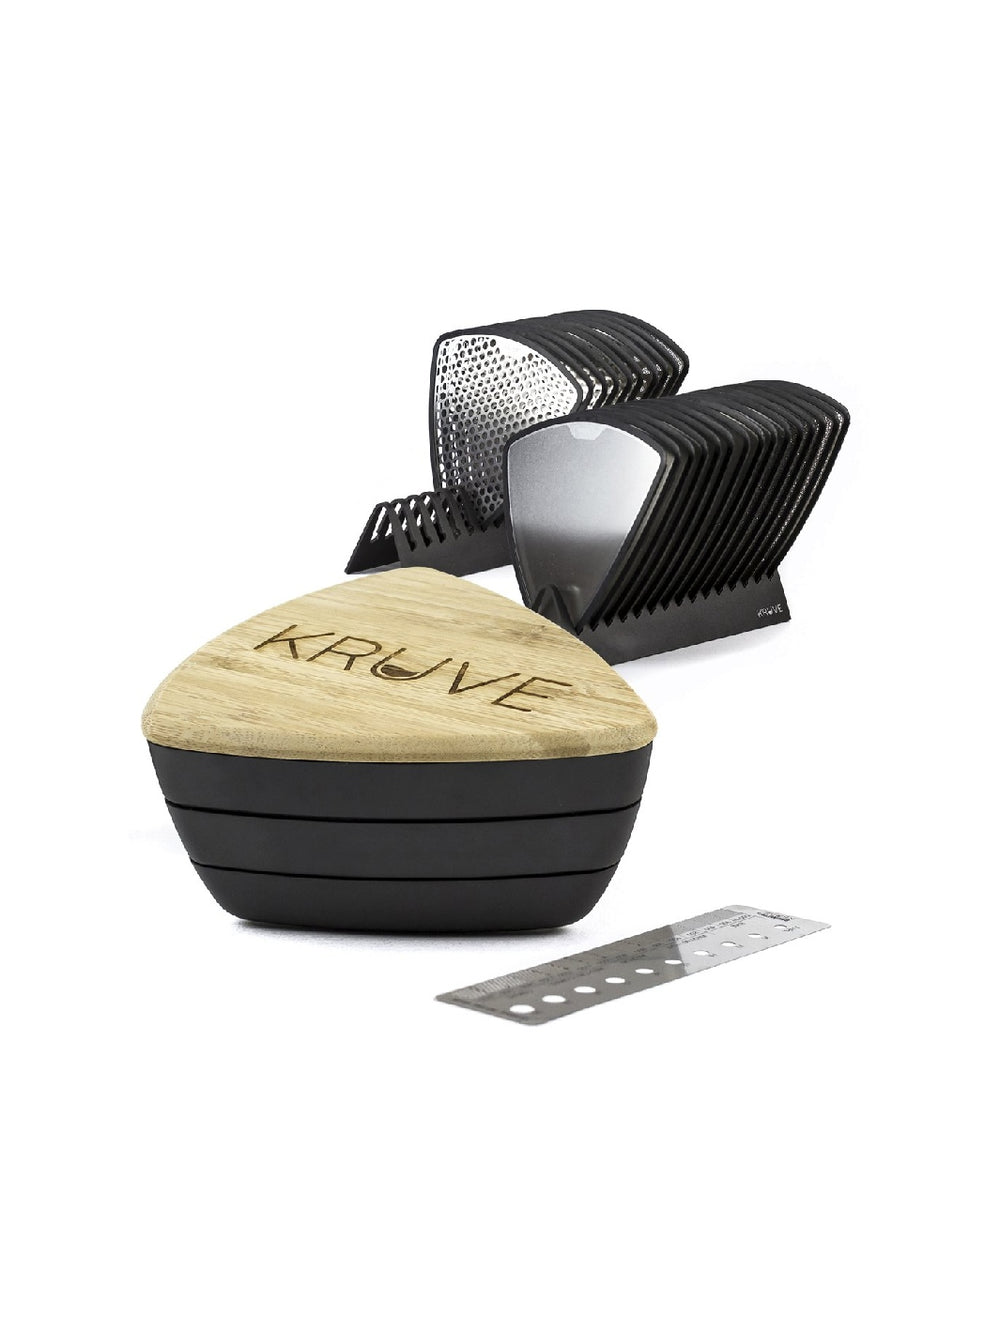 Photo of KRUVE Sifter MAX ( Black ) [ Kruve ] [ Sifters ]